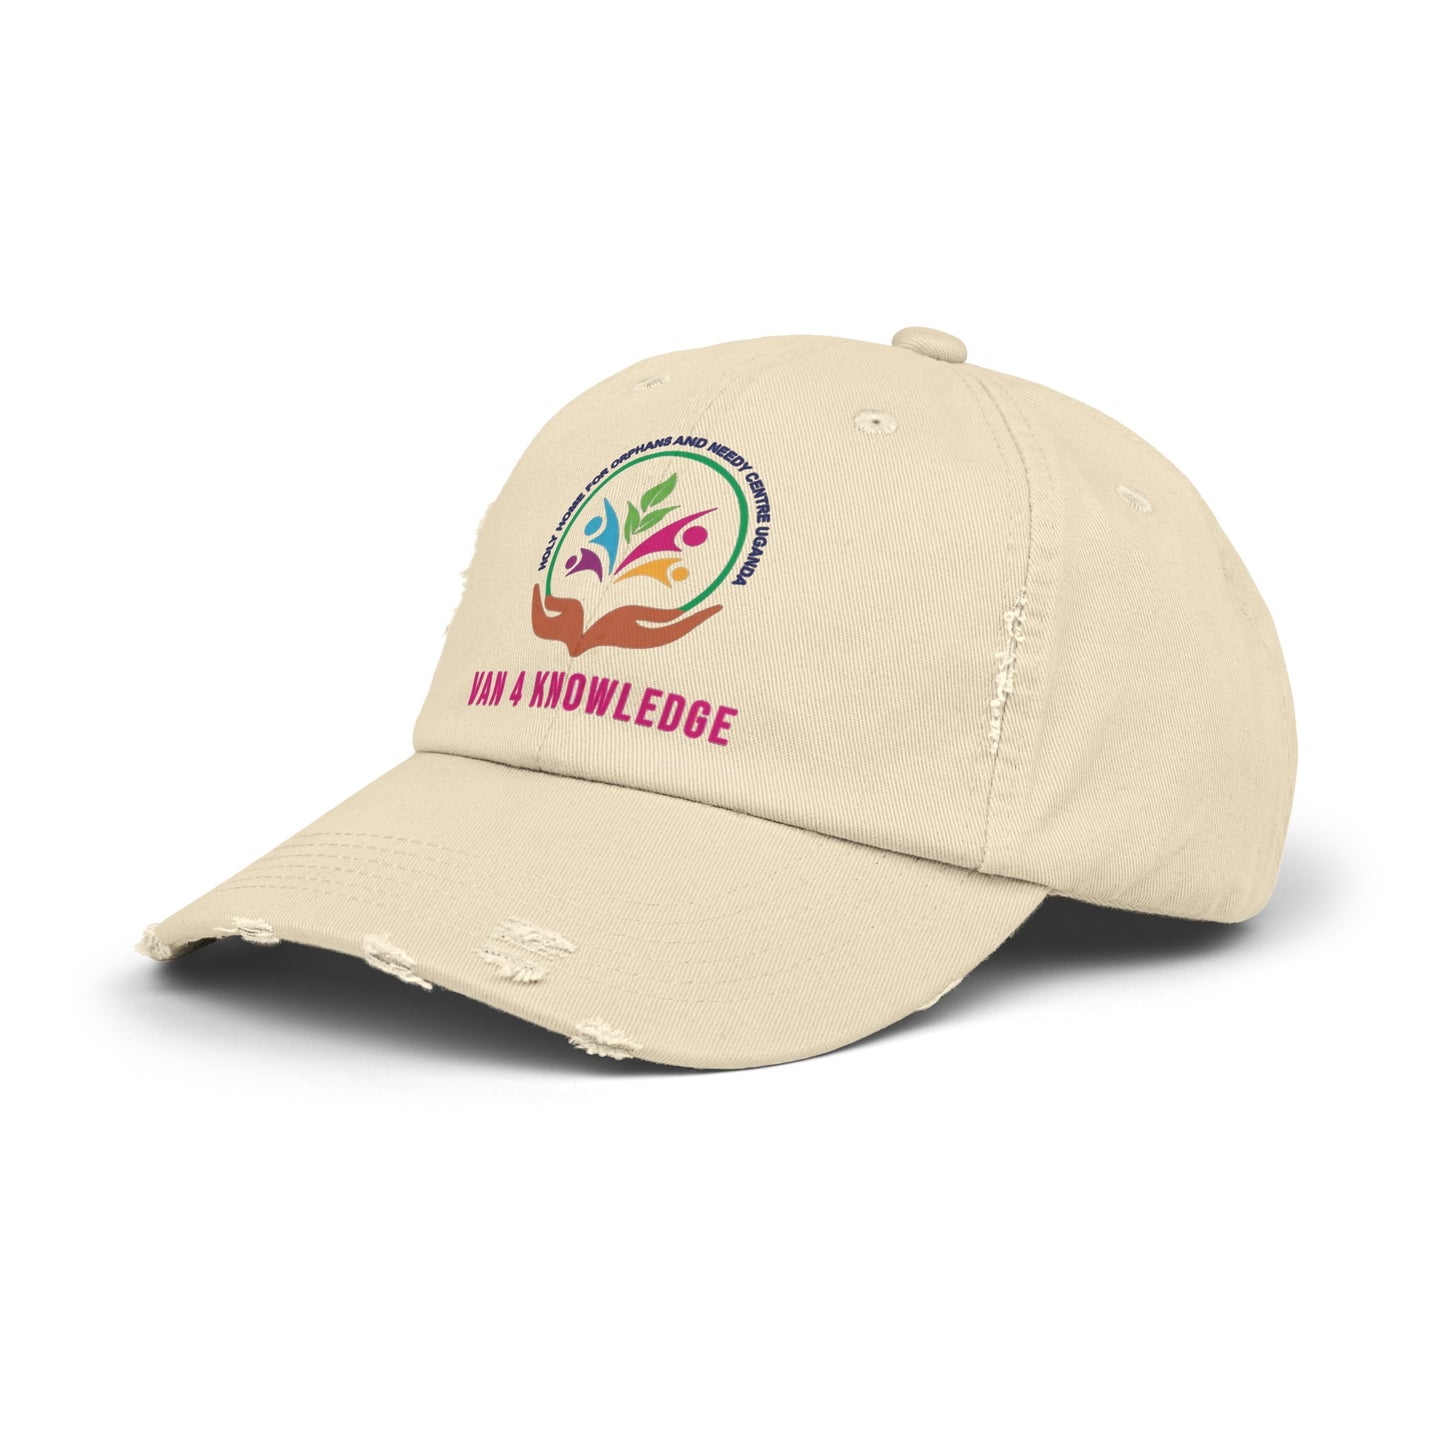 Van 4 Knowledge Unisex Distressed Cap - **In Support of Holy Home Orphanage Uganda**